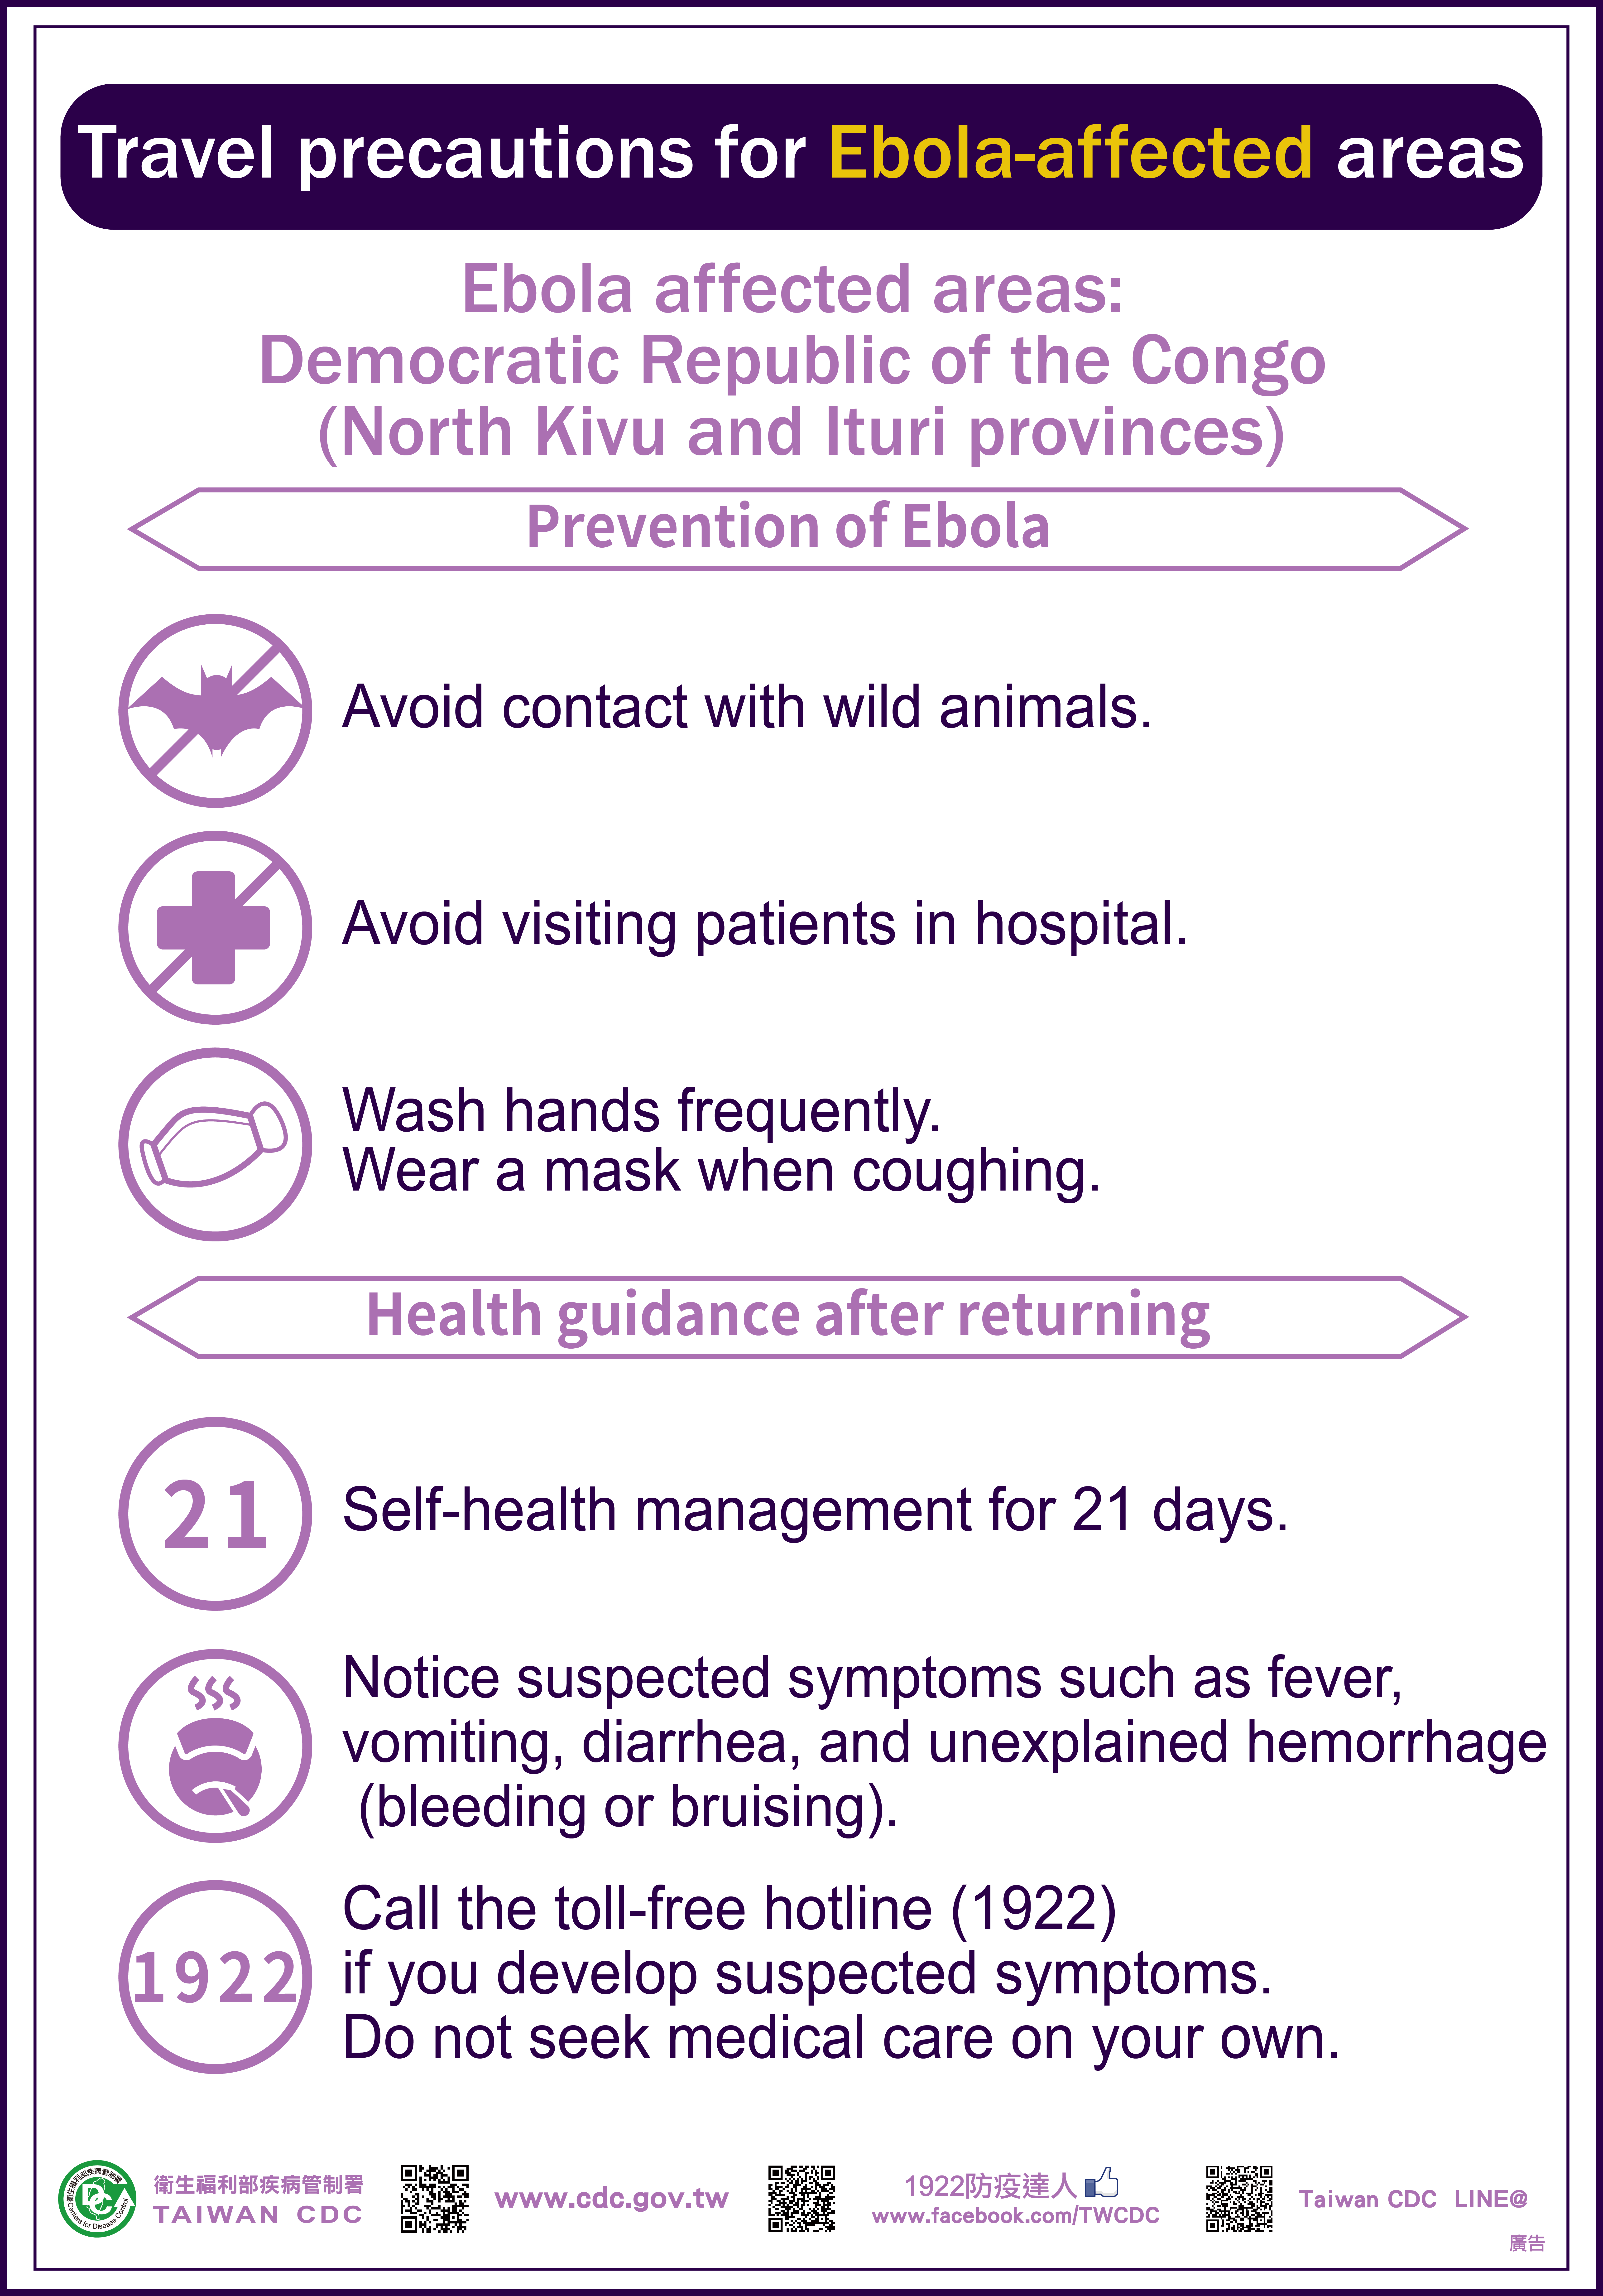 Travel precautions for Ebola-affected areas(2019).png